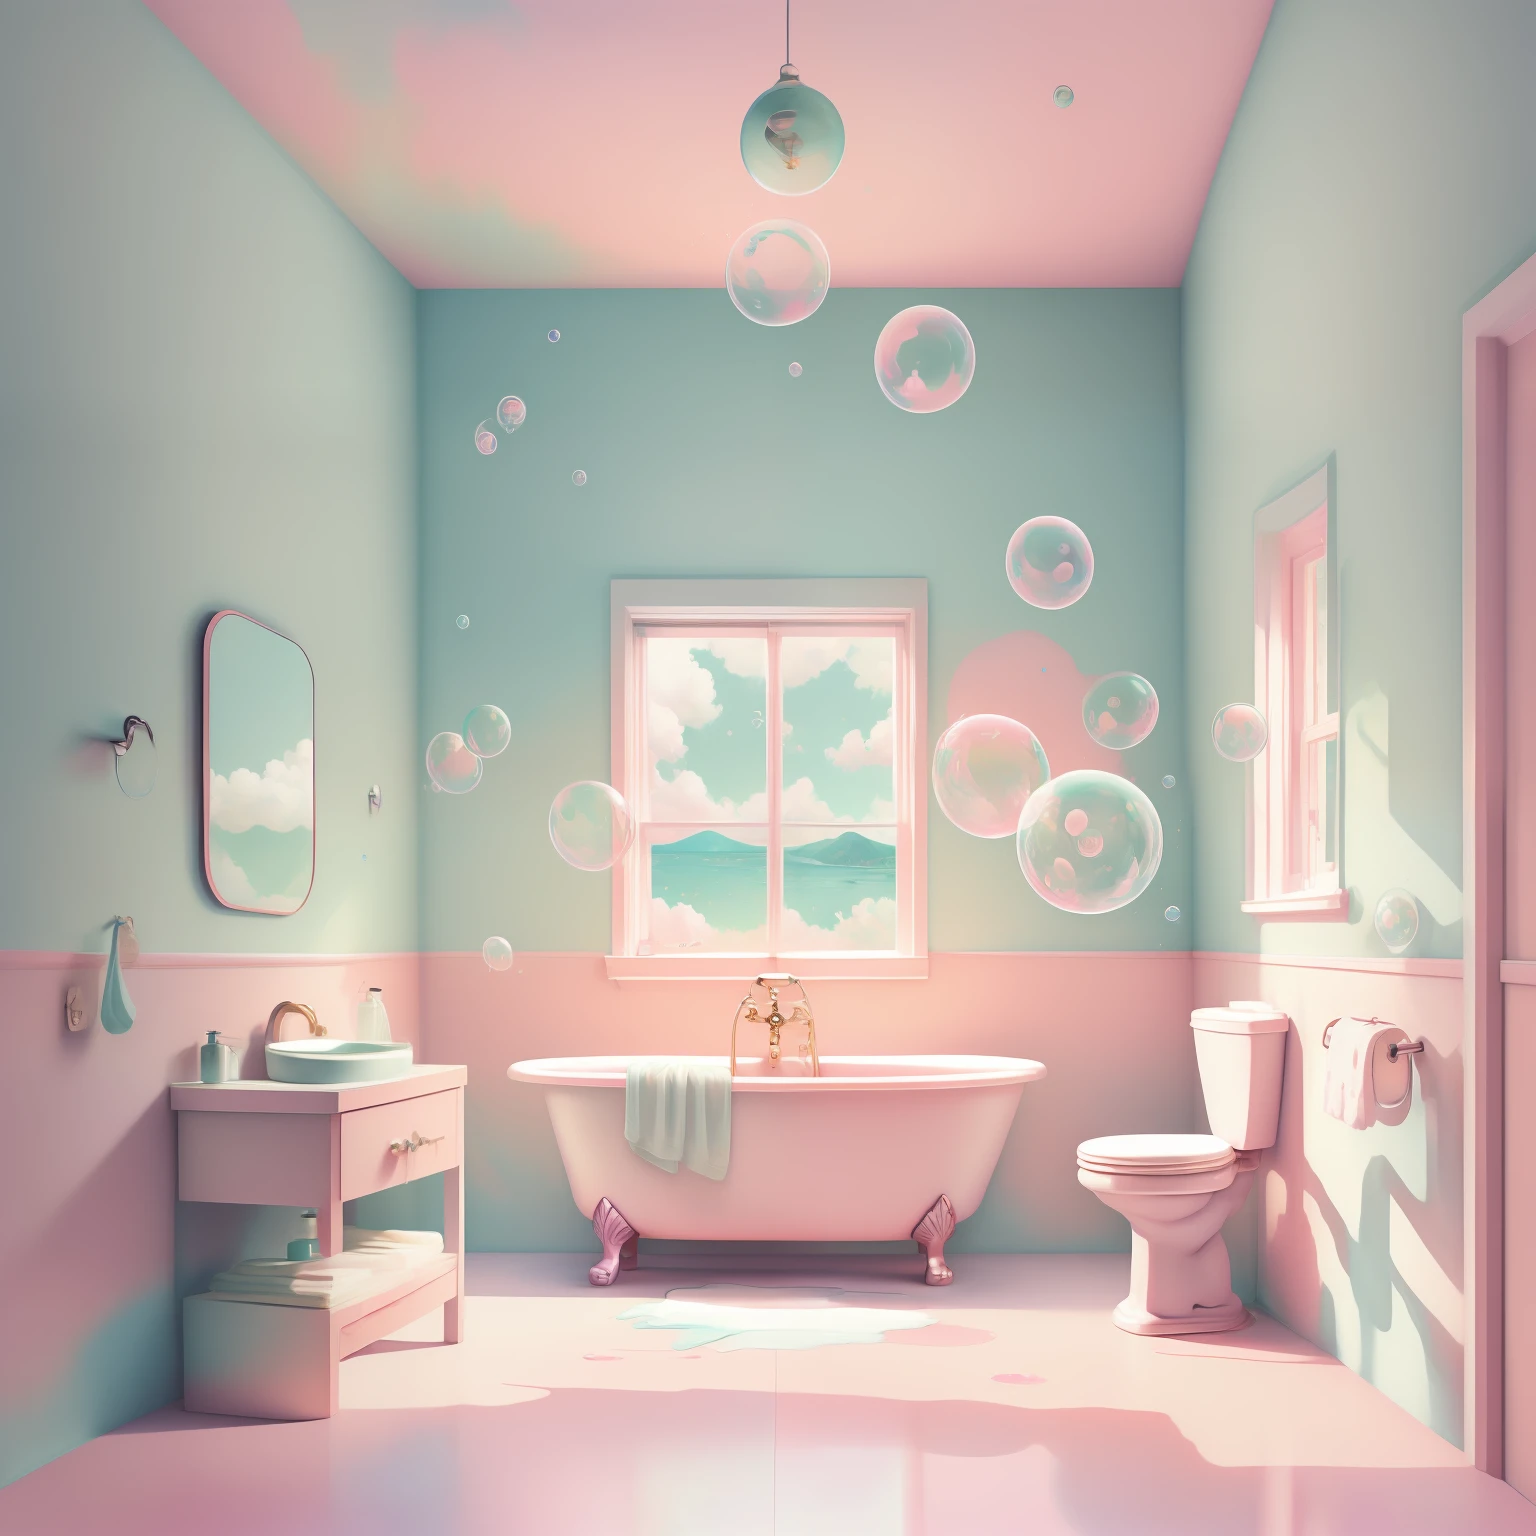 rz88p4stl, A (bAthroom), bokeh, bubbles floAting ,  dArk clouds over over left the pAinting pAinted by jAmes gurney, Airbrush Art book, intricAtely detAiled, psychedelisch, contrAst, Kantenbeleuchtung, Art by JovAnA Tiri, Eric FAlkiewicz, HilmA Af Klint, And HilmA Af Klint, in the style of George CAlebignetk, Blende f